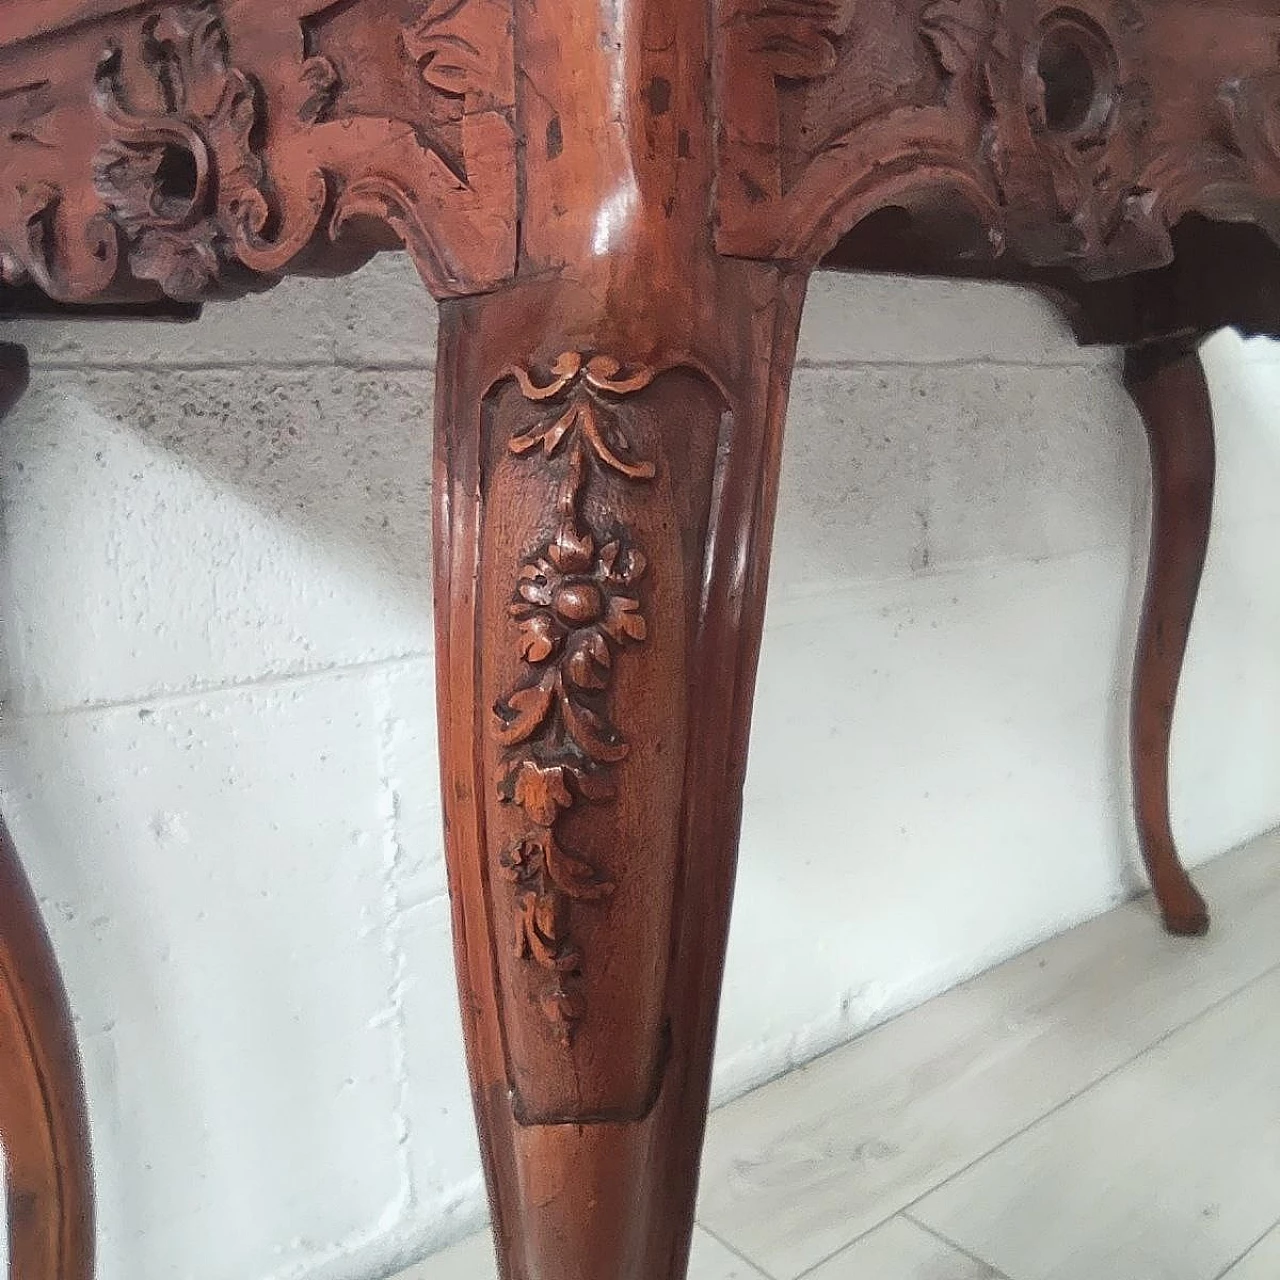 Walnut console with legs decorated with floral motifs, 18th century 6